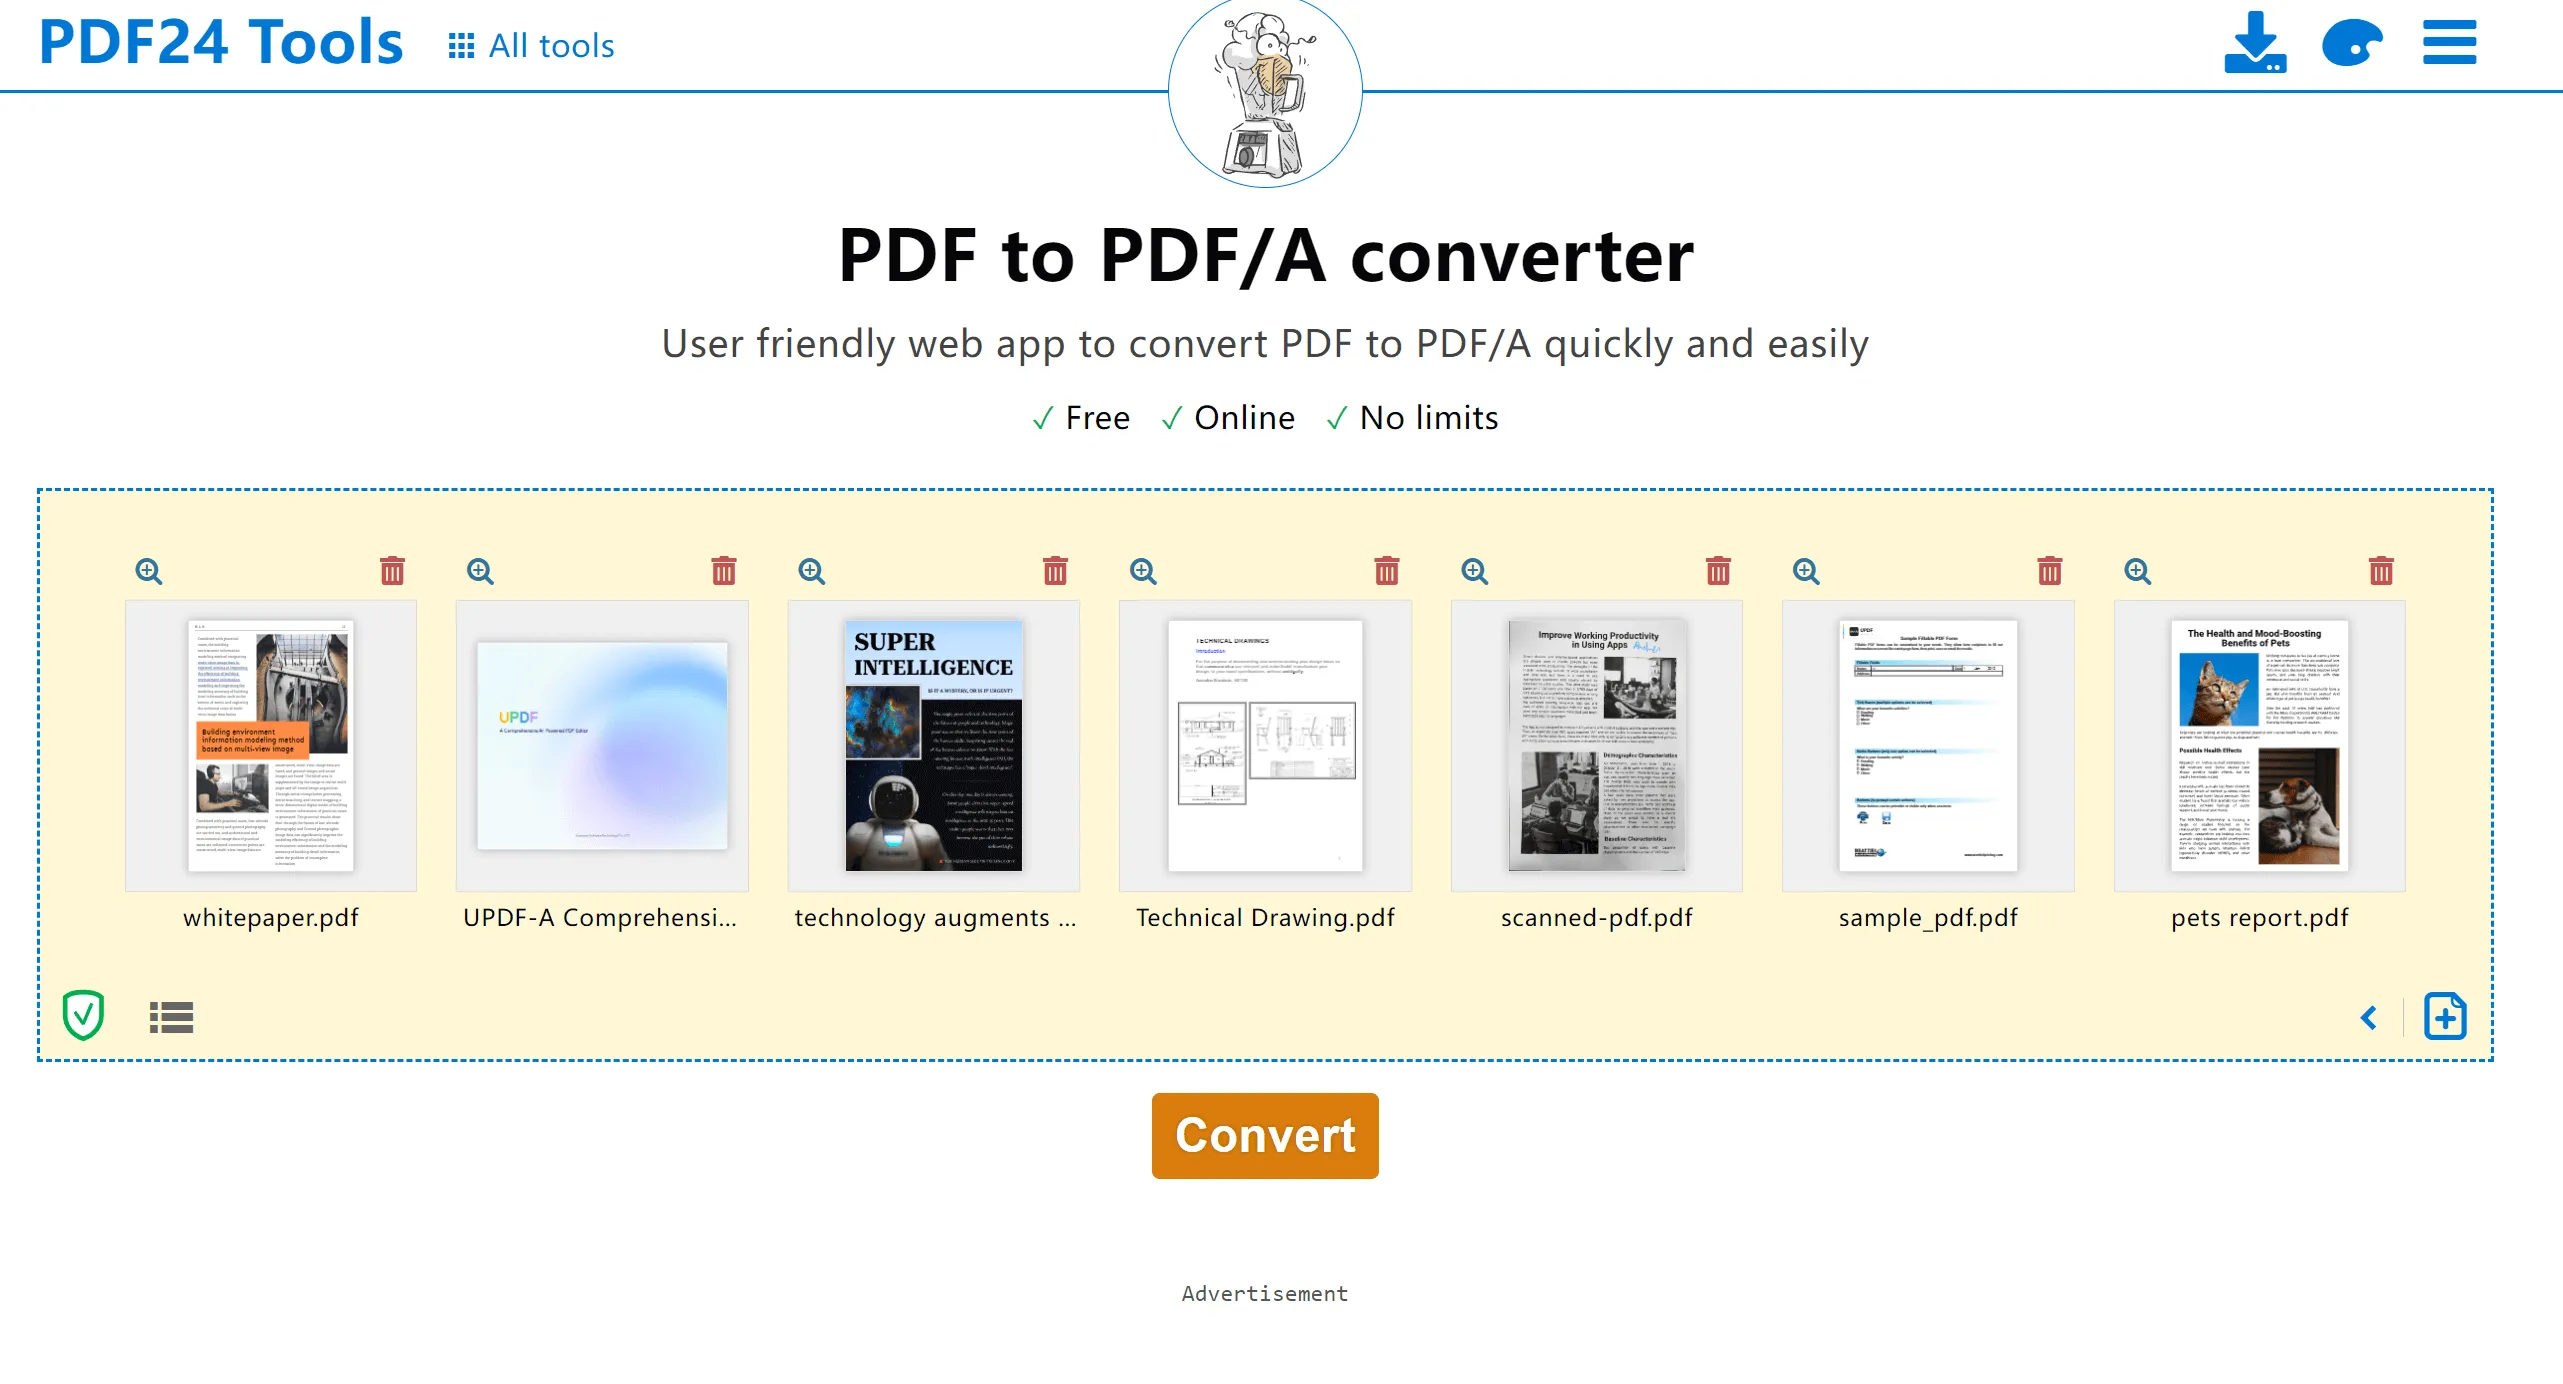 Click on the convert to convert PDF to PDF/A in batch with PDF24tools